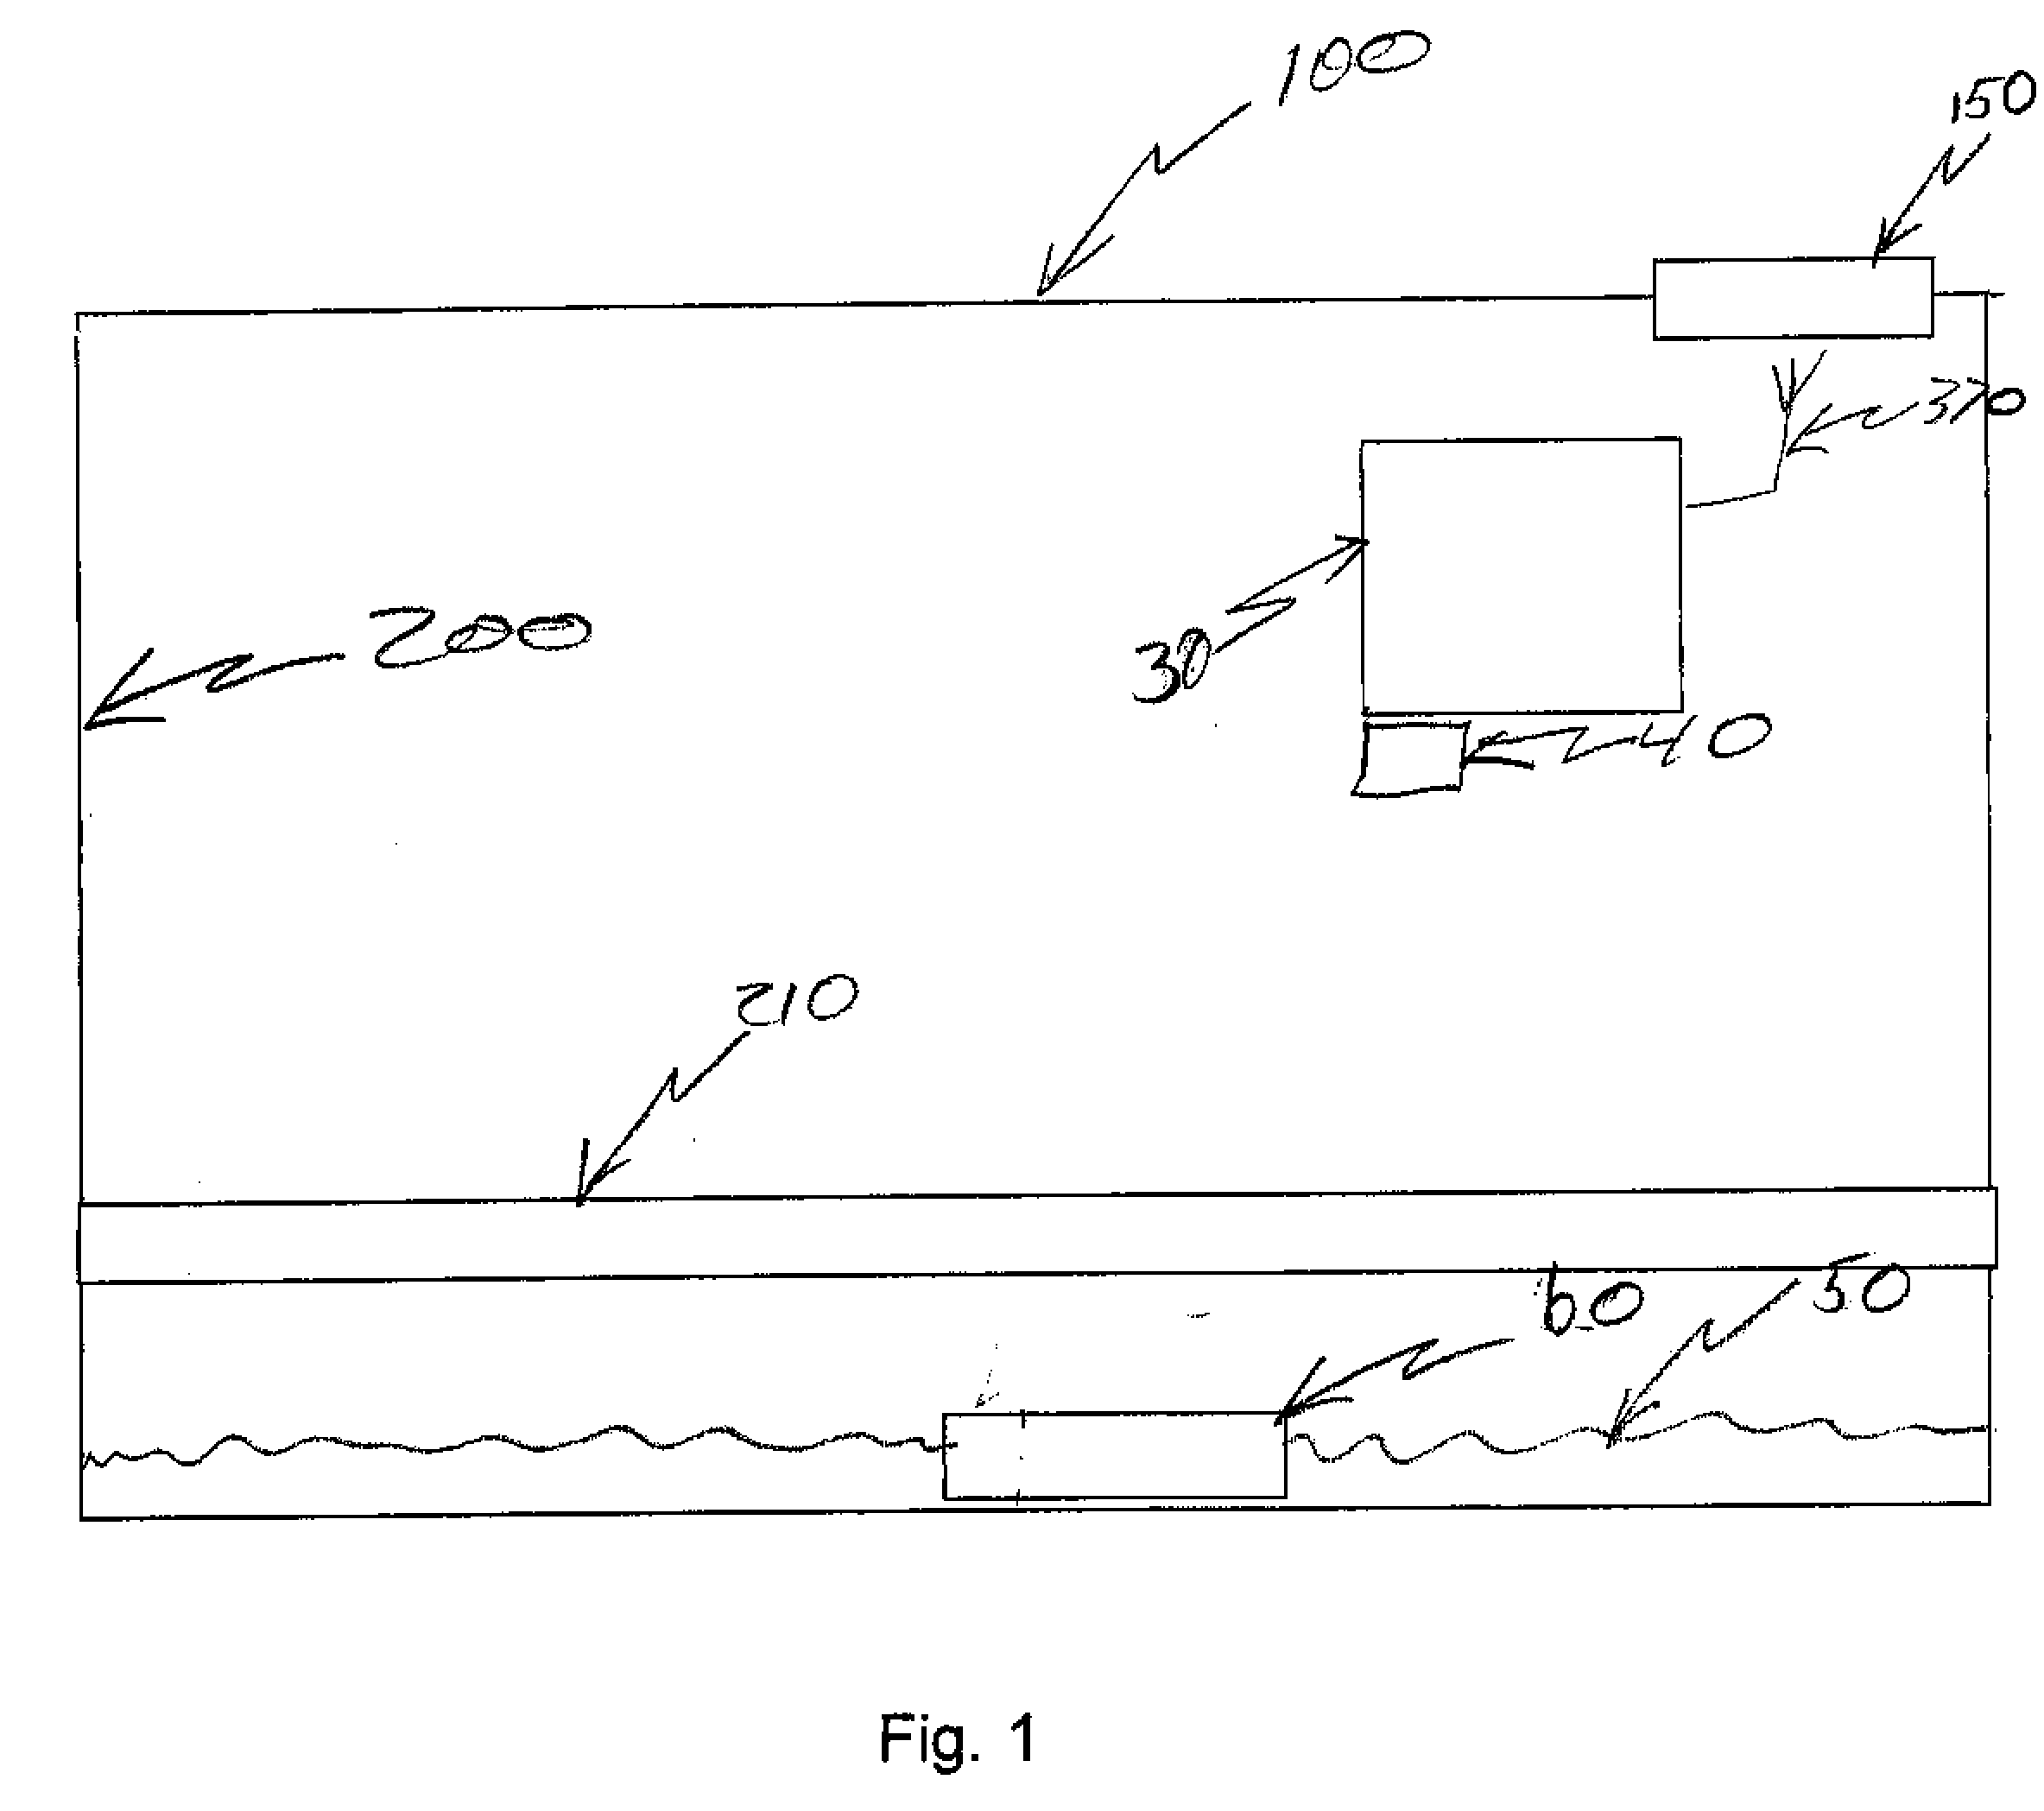 Fluid Monitoring Apparatus and Method